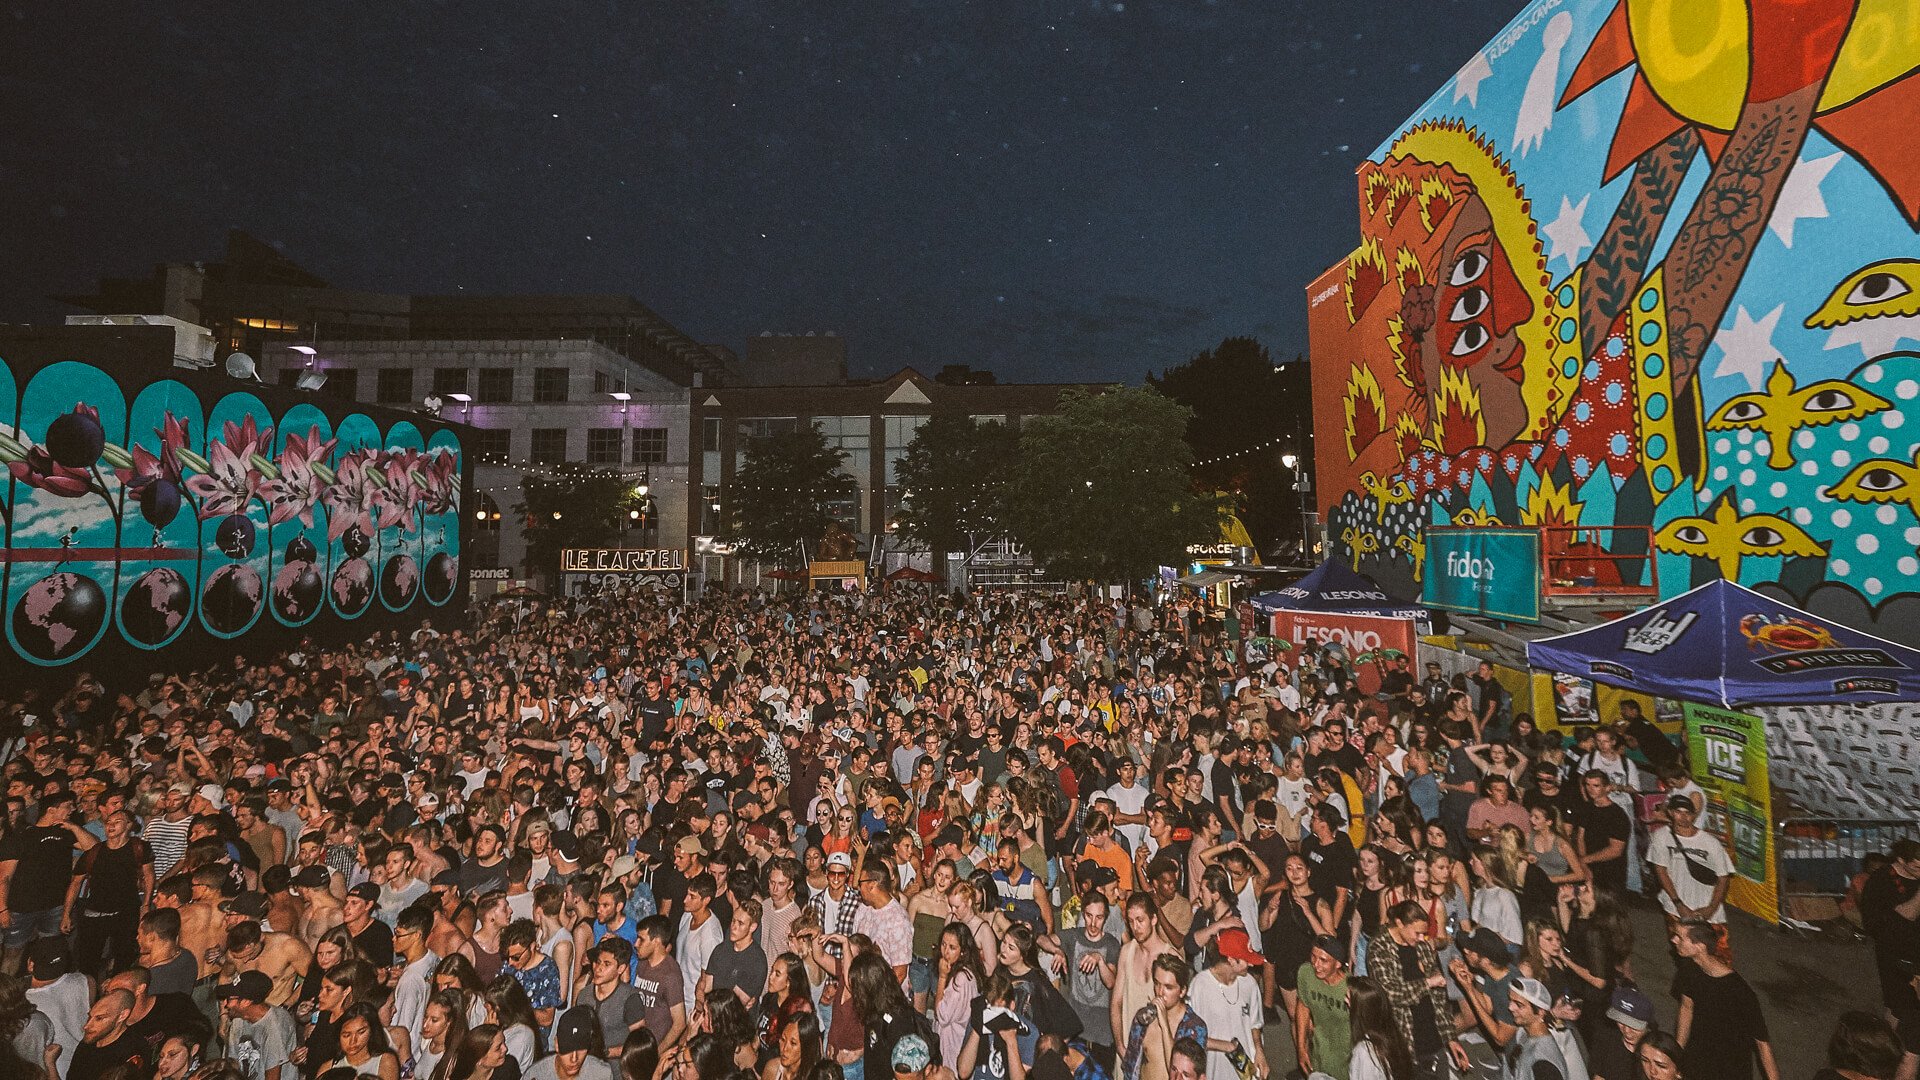 Photo of Mural Festival at night. There are two murals on either side, with a large crowd of festival-goers in the middle.